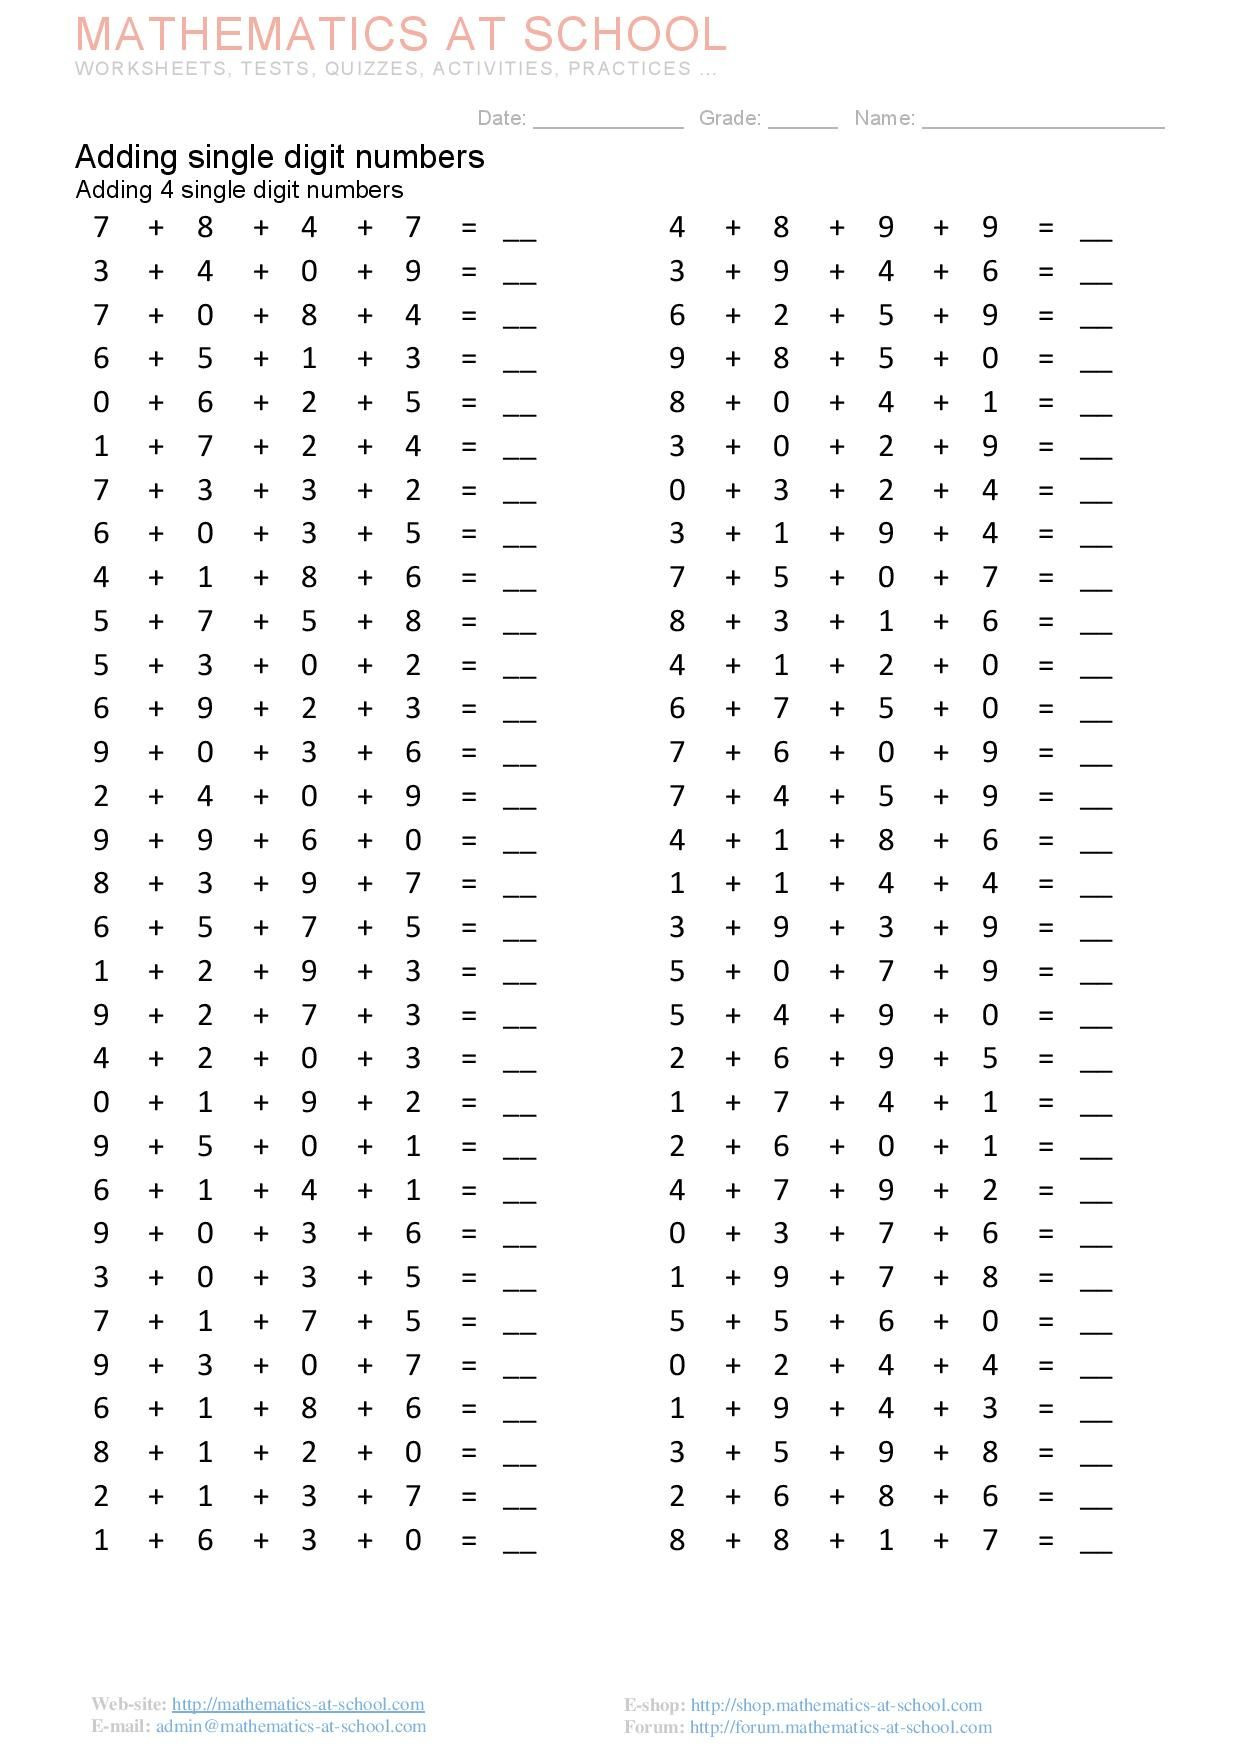 two-digit-addition-and-subtraction-worksheet-for-students-to-practice-numbers-1-10